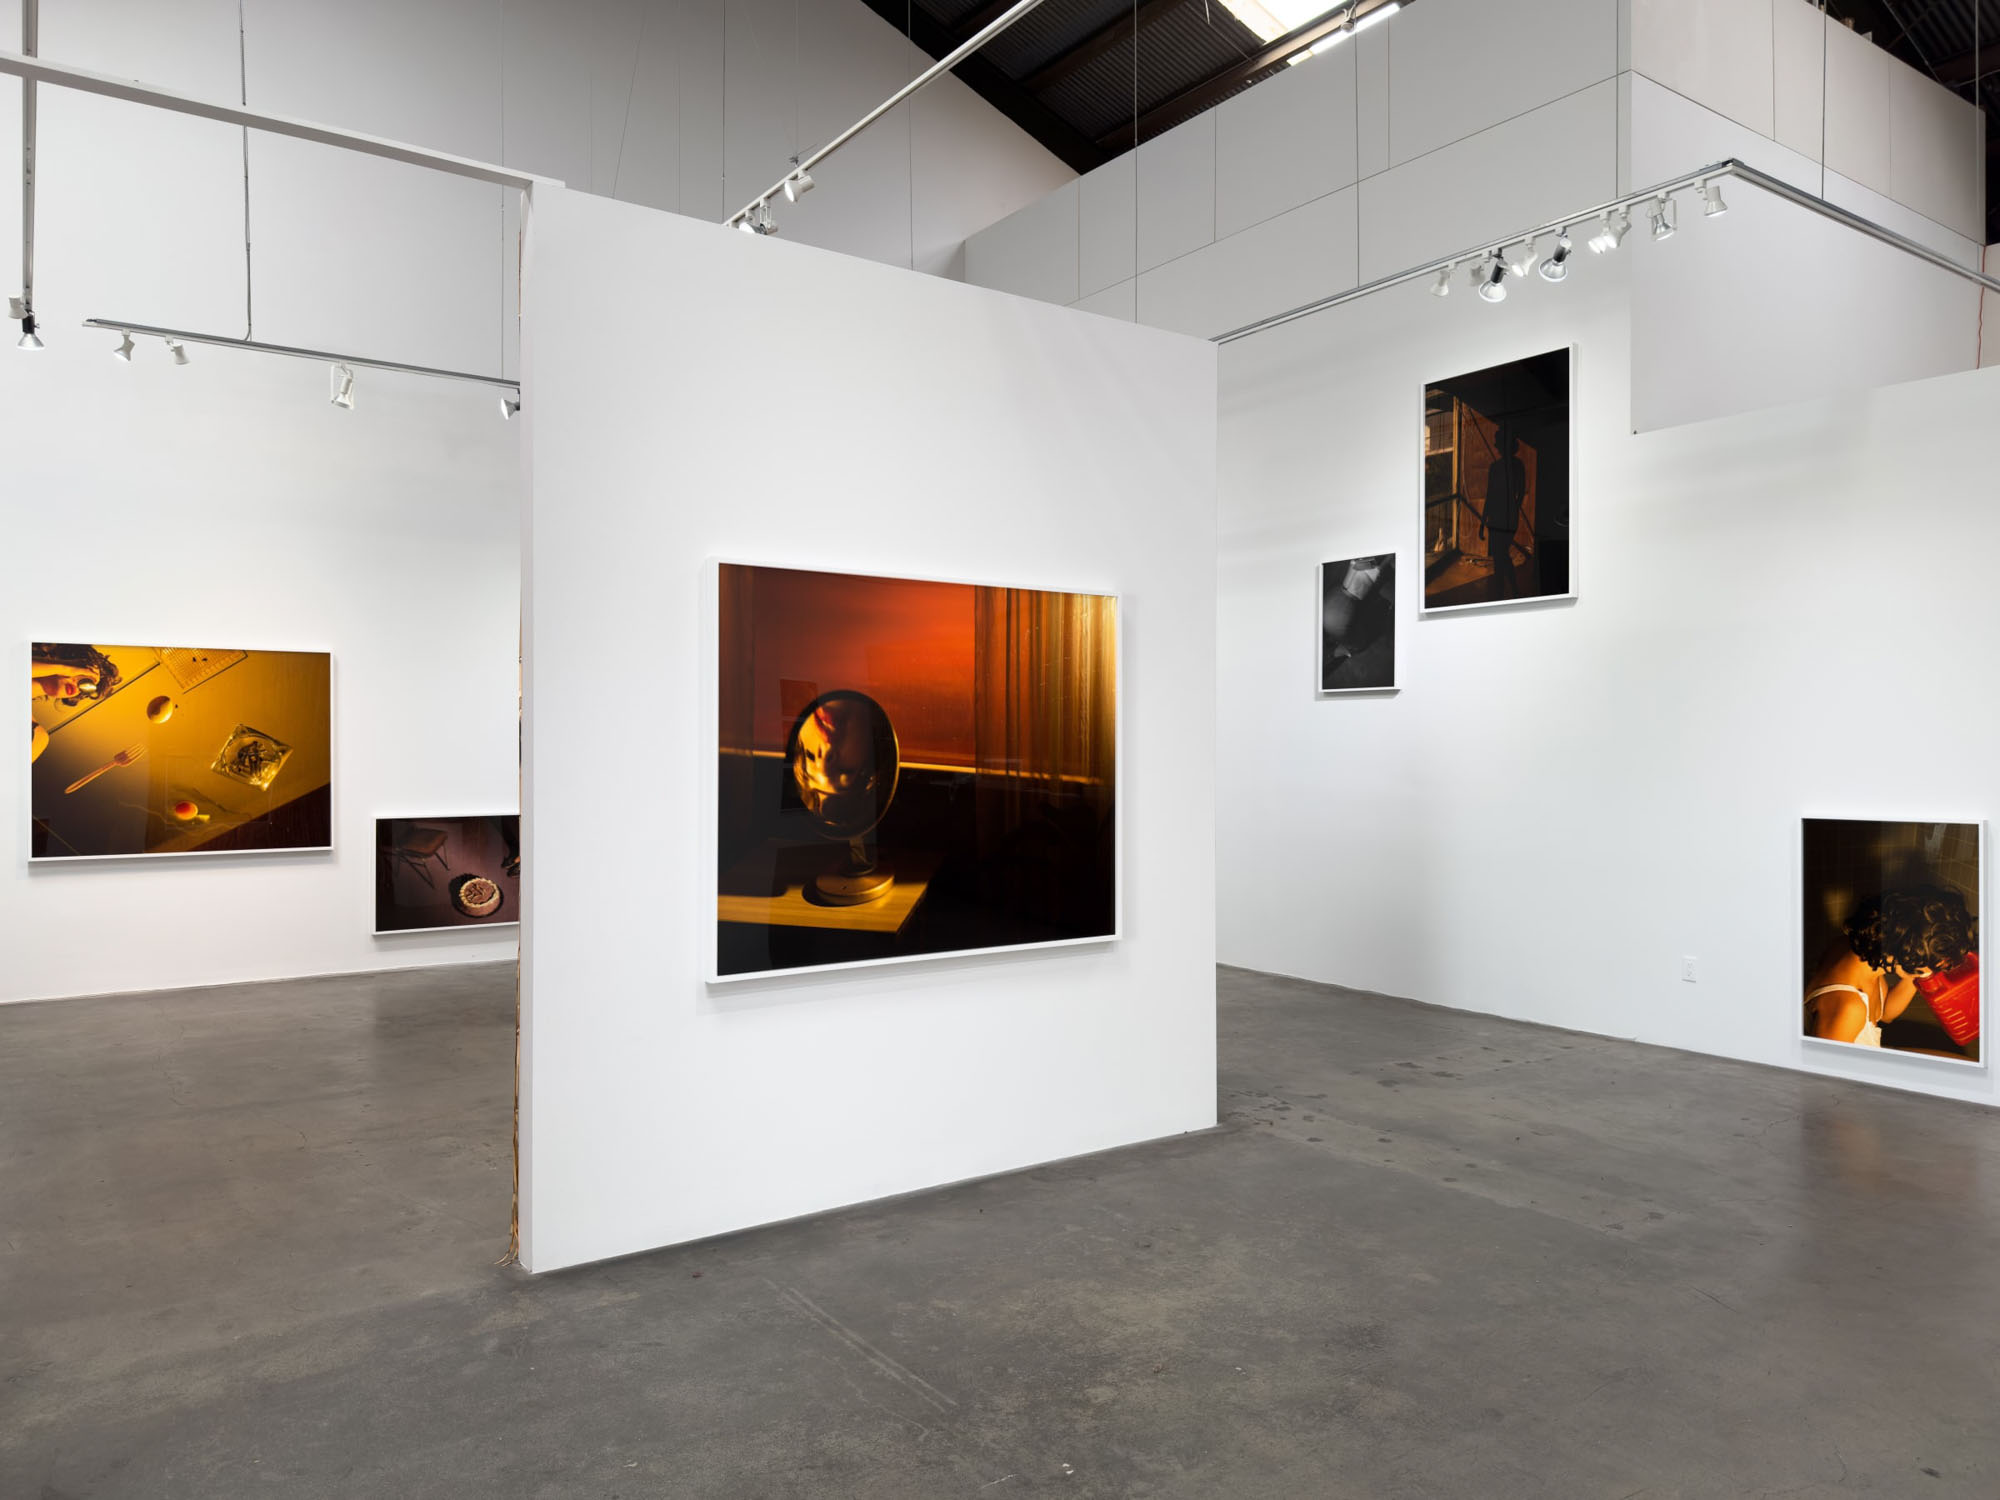 Installation view of "Break in Case of Emergency" at Rose Gallery